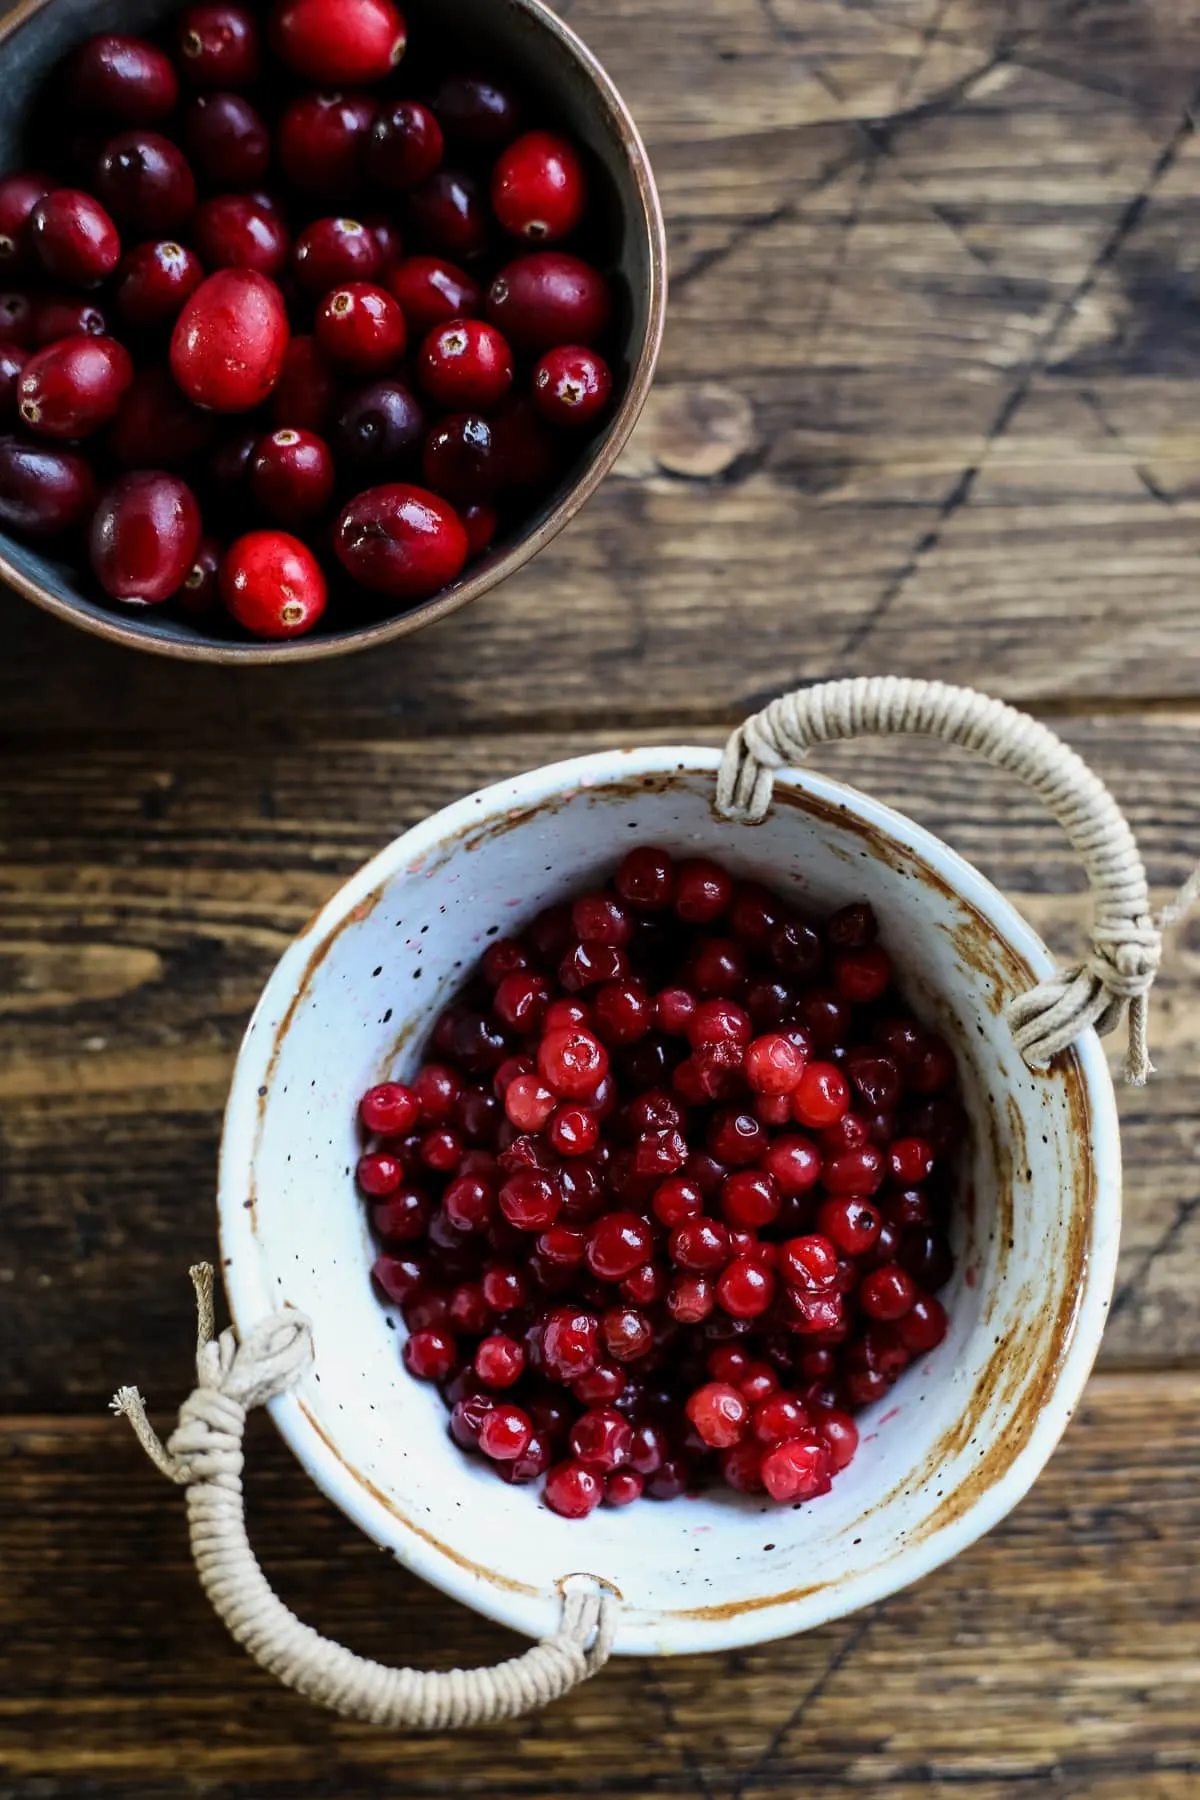 Cranberries and Lingonberries in Bowls.